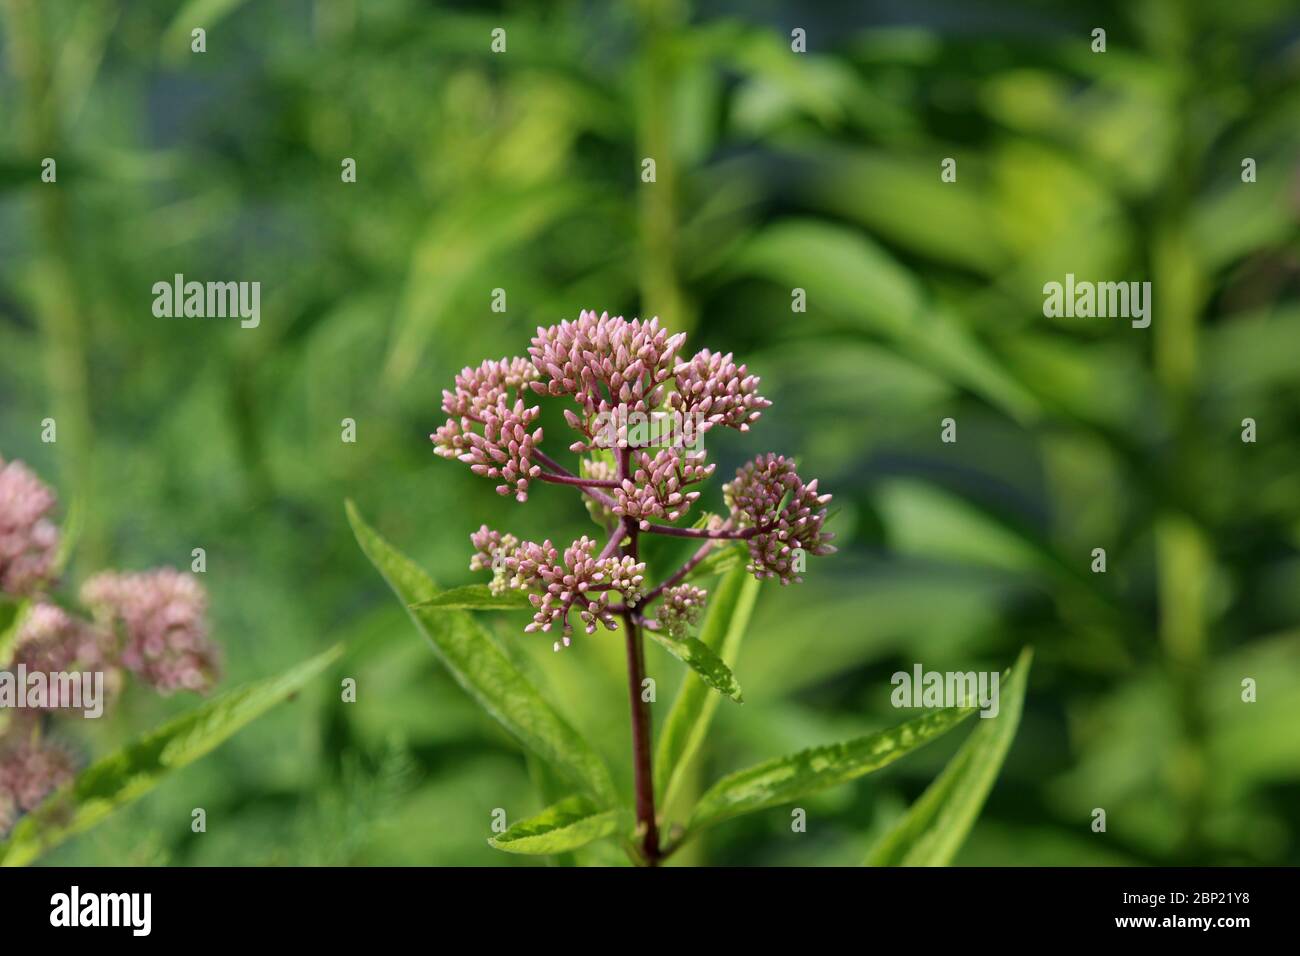 Close up of a stalk of Joe Pye Weed filled with flower buds in a garden with a blurred background in Wisconsin, USA Stock Photo